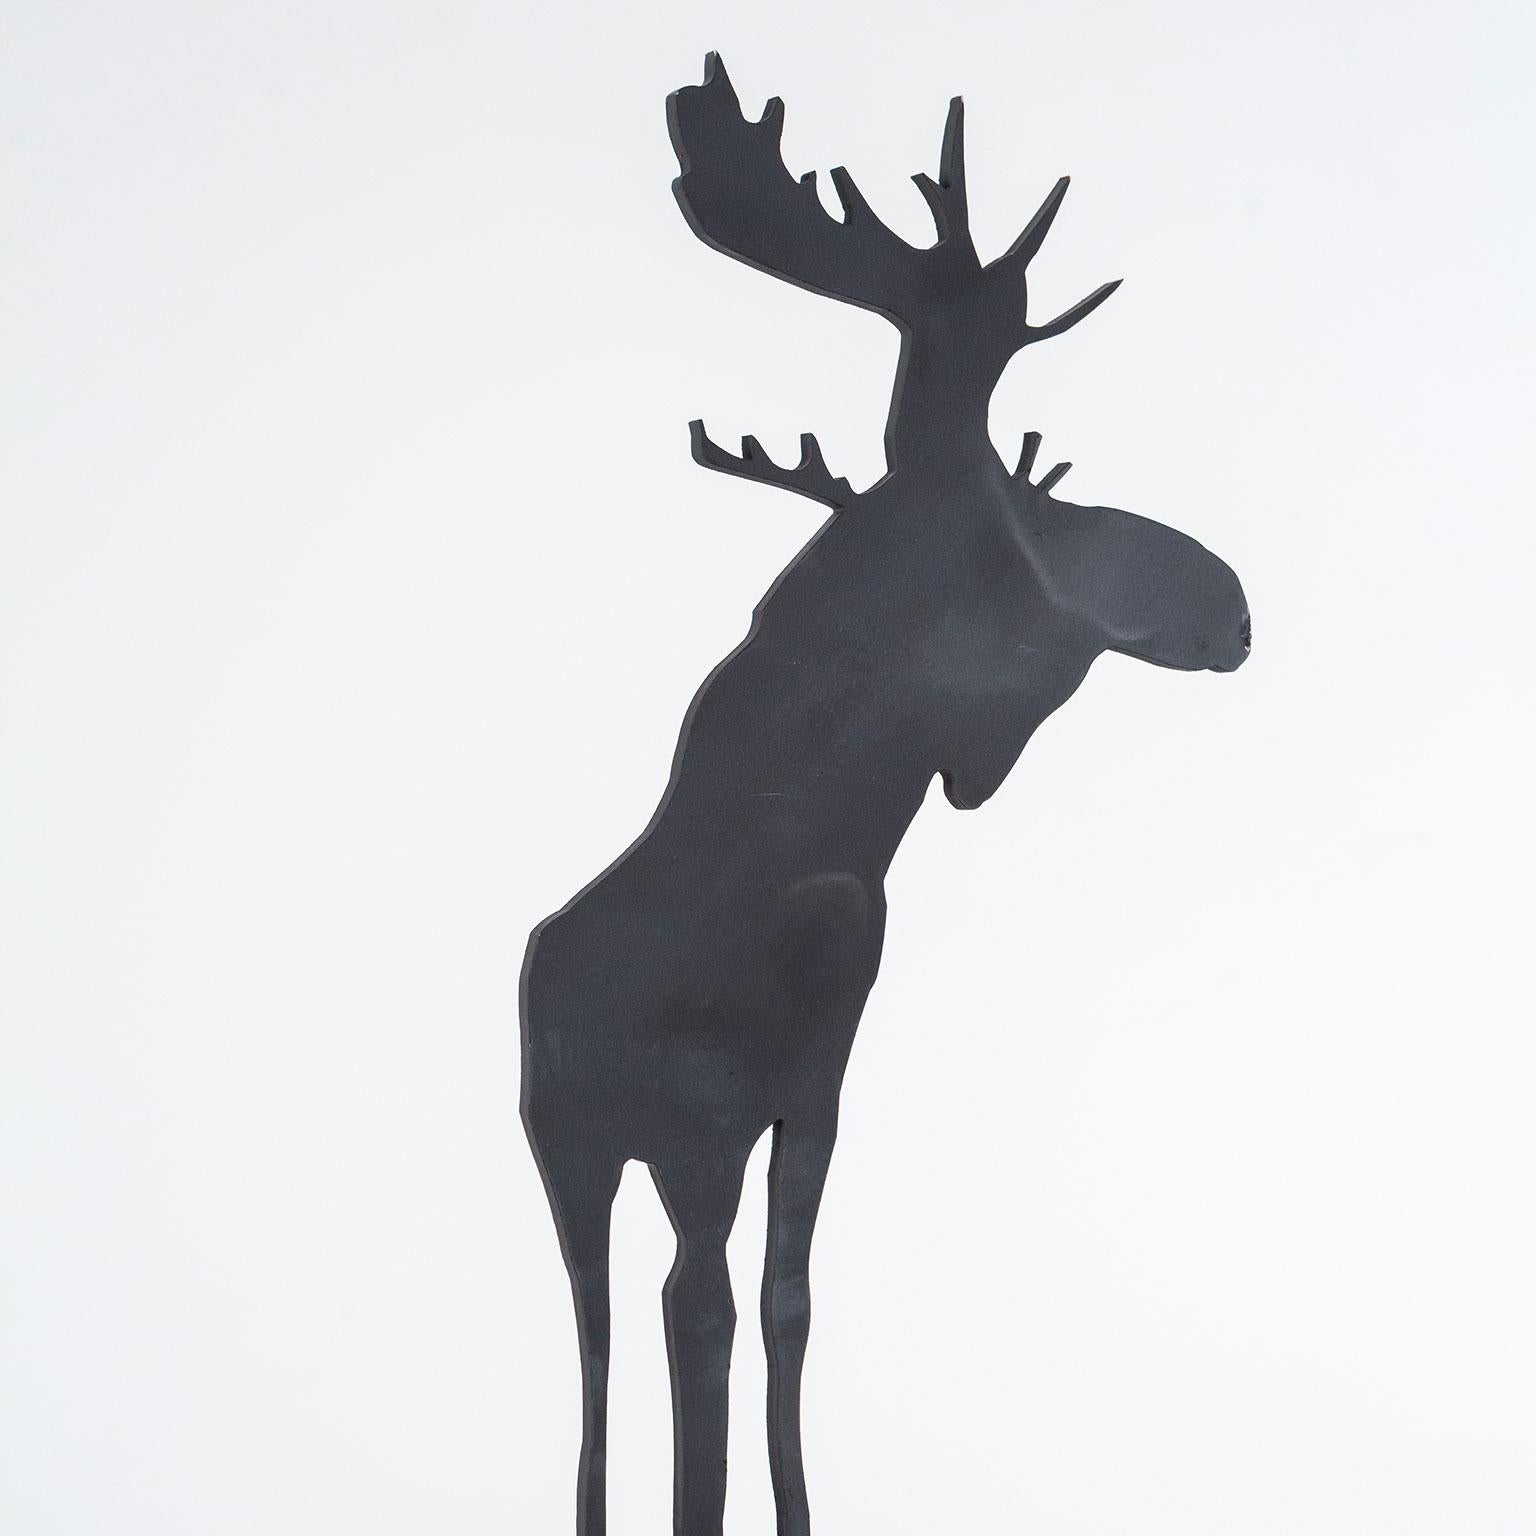 Mooseamour - Contemporary Sculpture by Charles Pachter